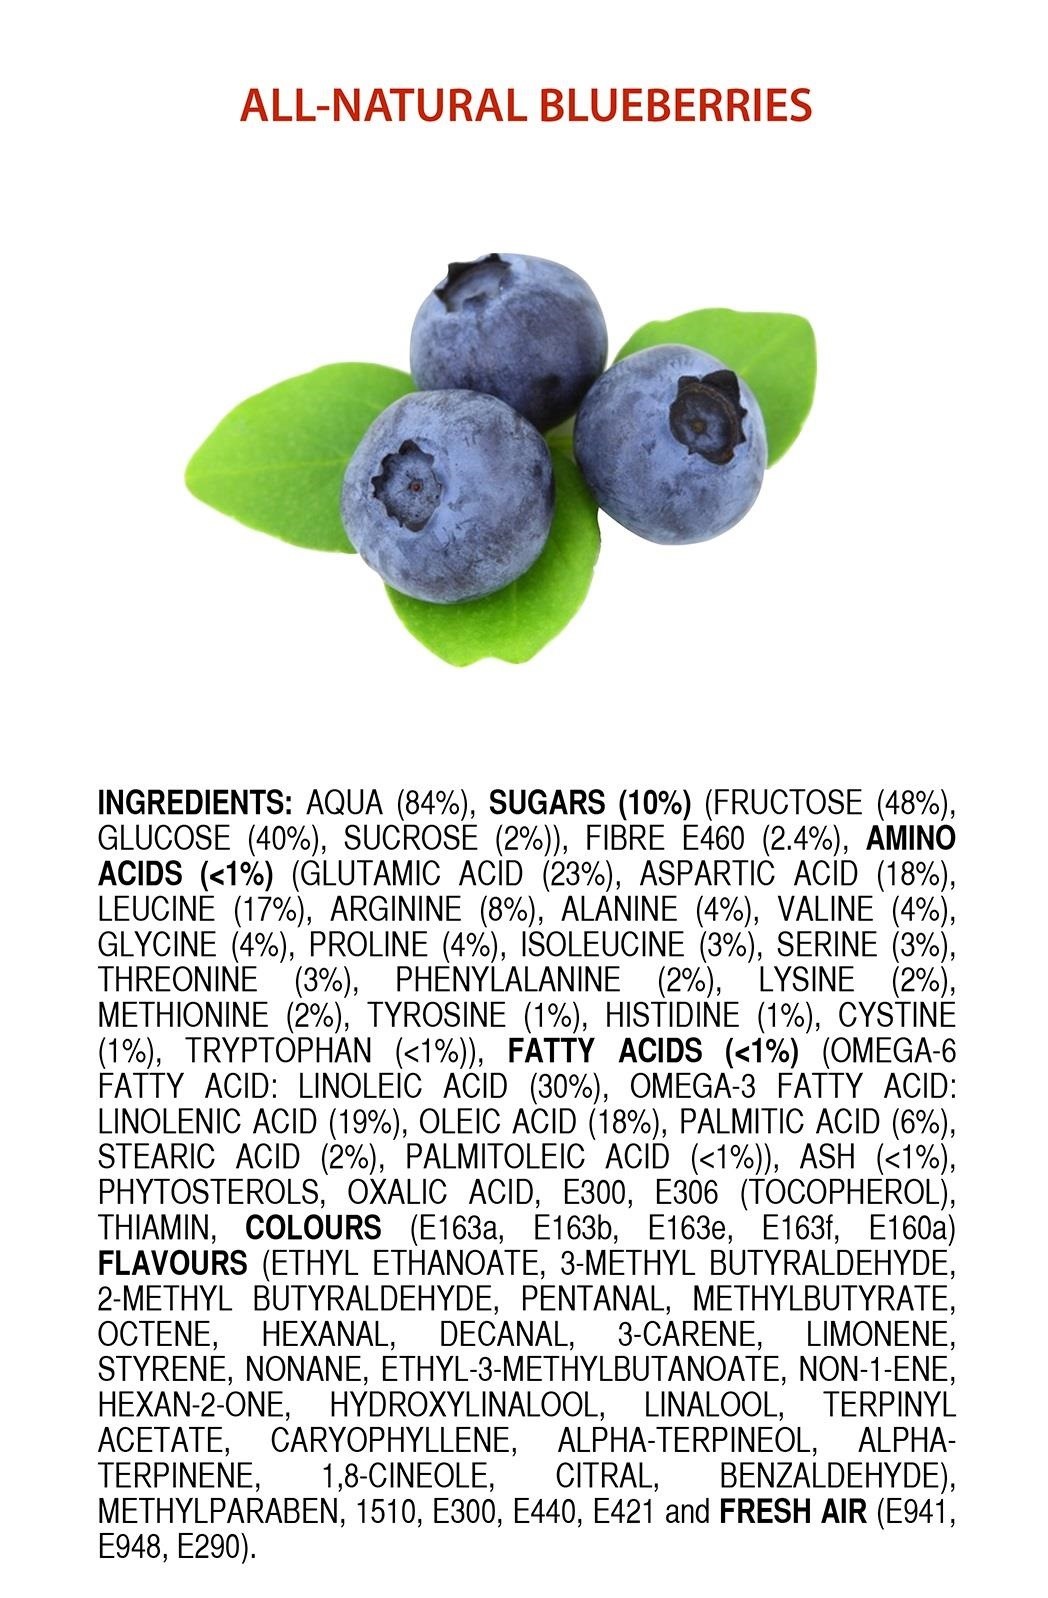 Food Chemistry: The "Ingredients" in Organic, All-Natural, Fruits & Eggs Are Not What You'd Expect